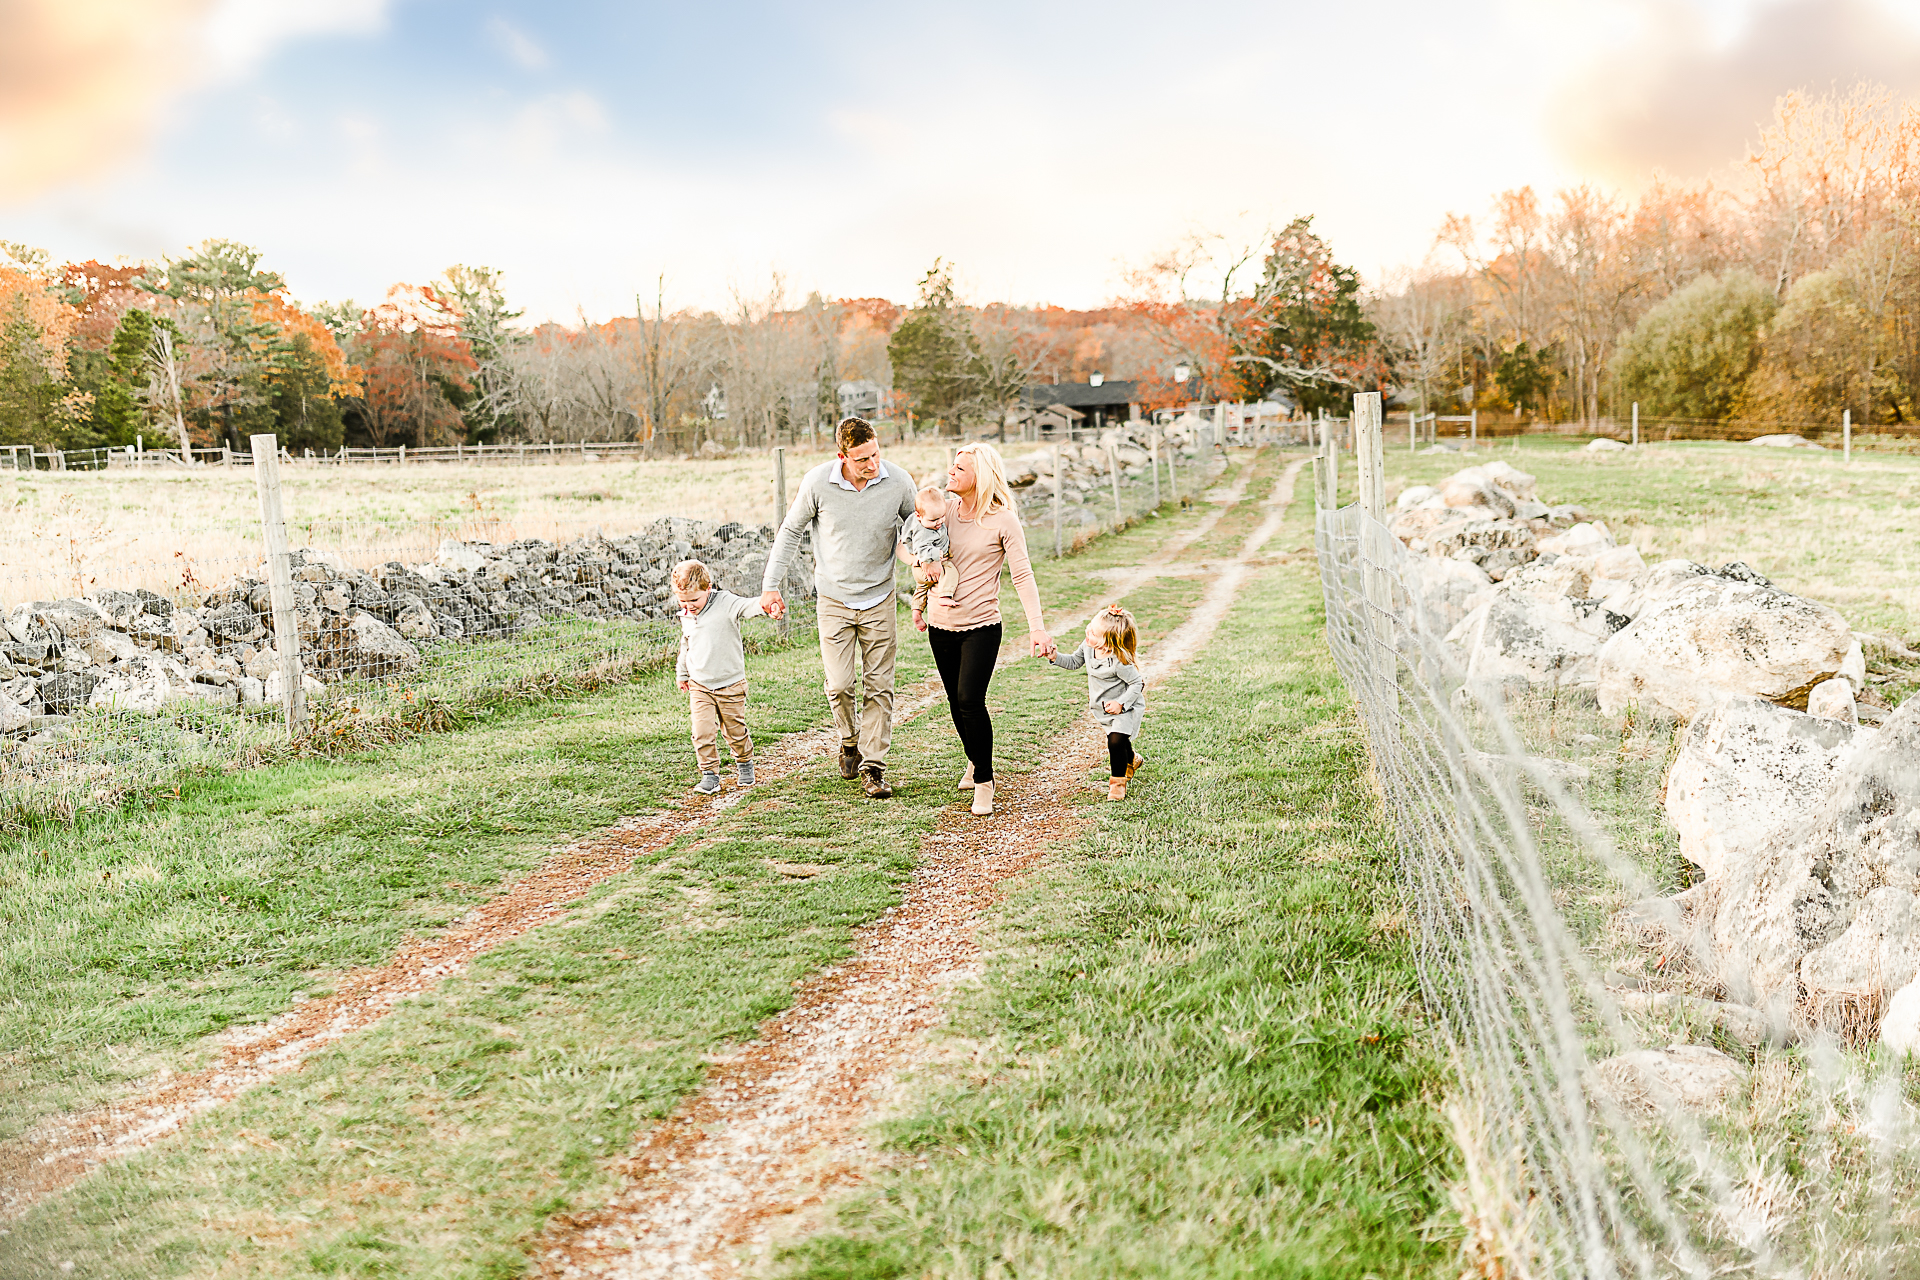 Photo by Norwell Photographer Christina Runnals | Family walking down a farm road